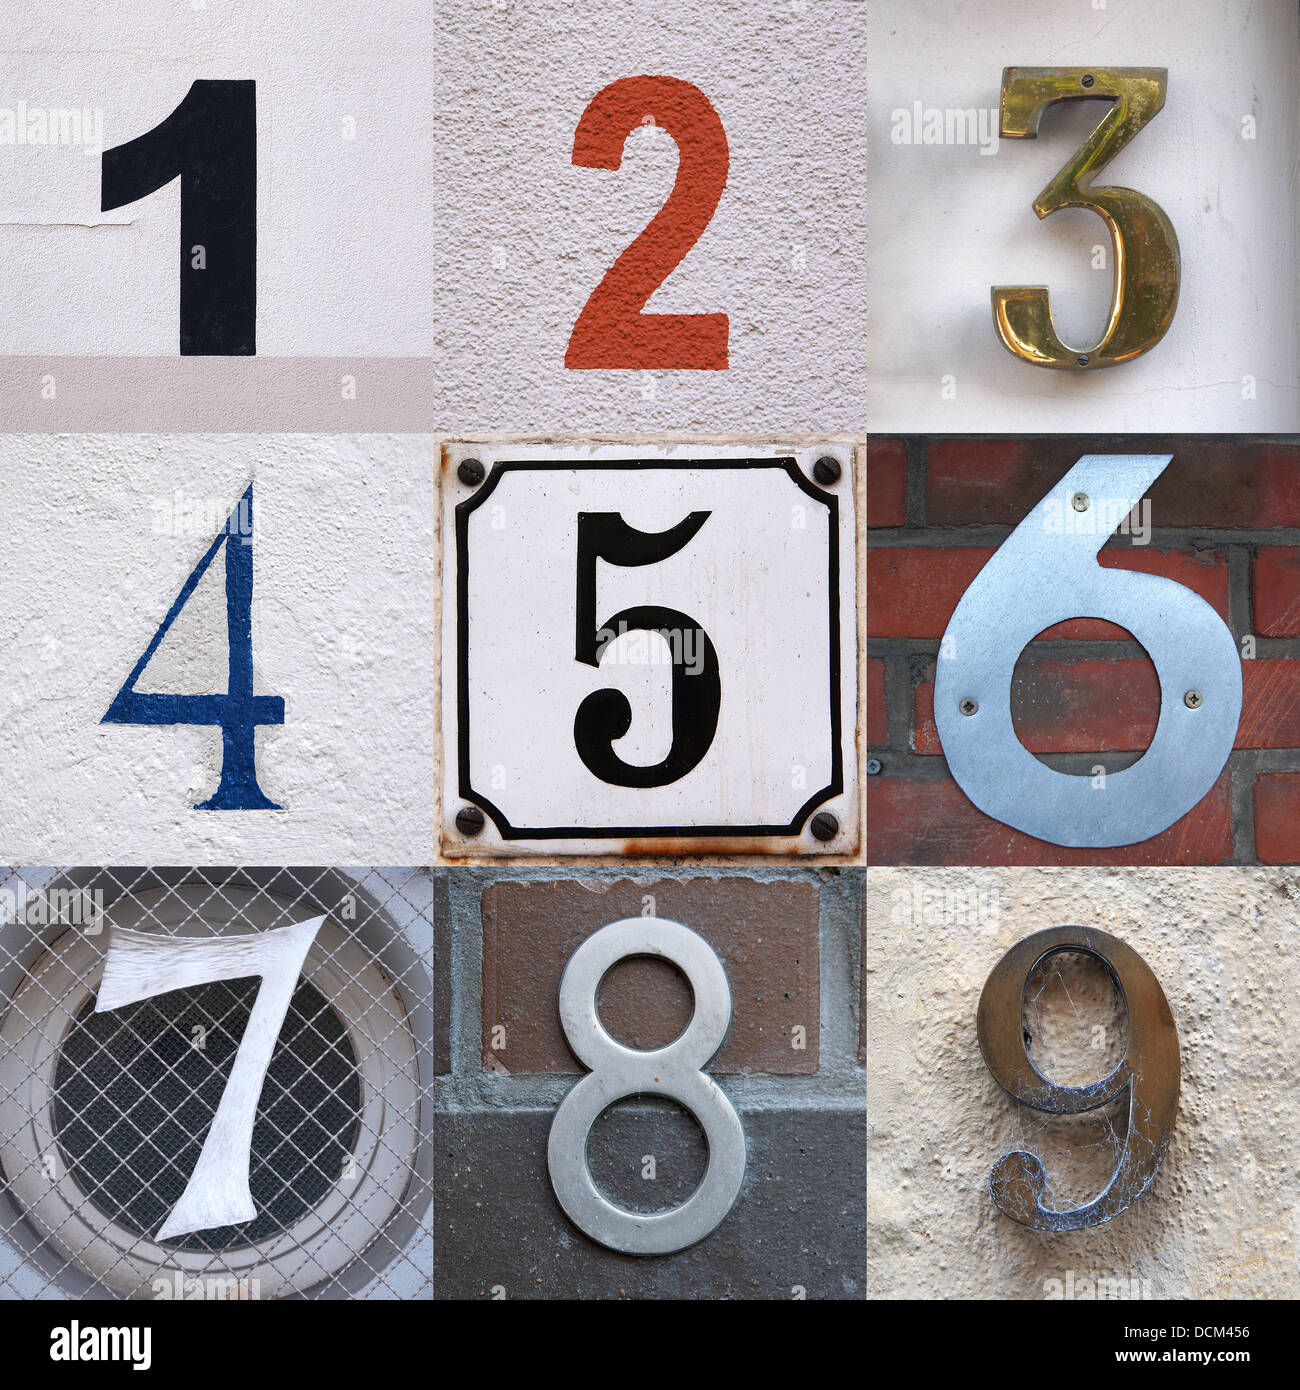 set of house numbers from one to nine Stock Photo